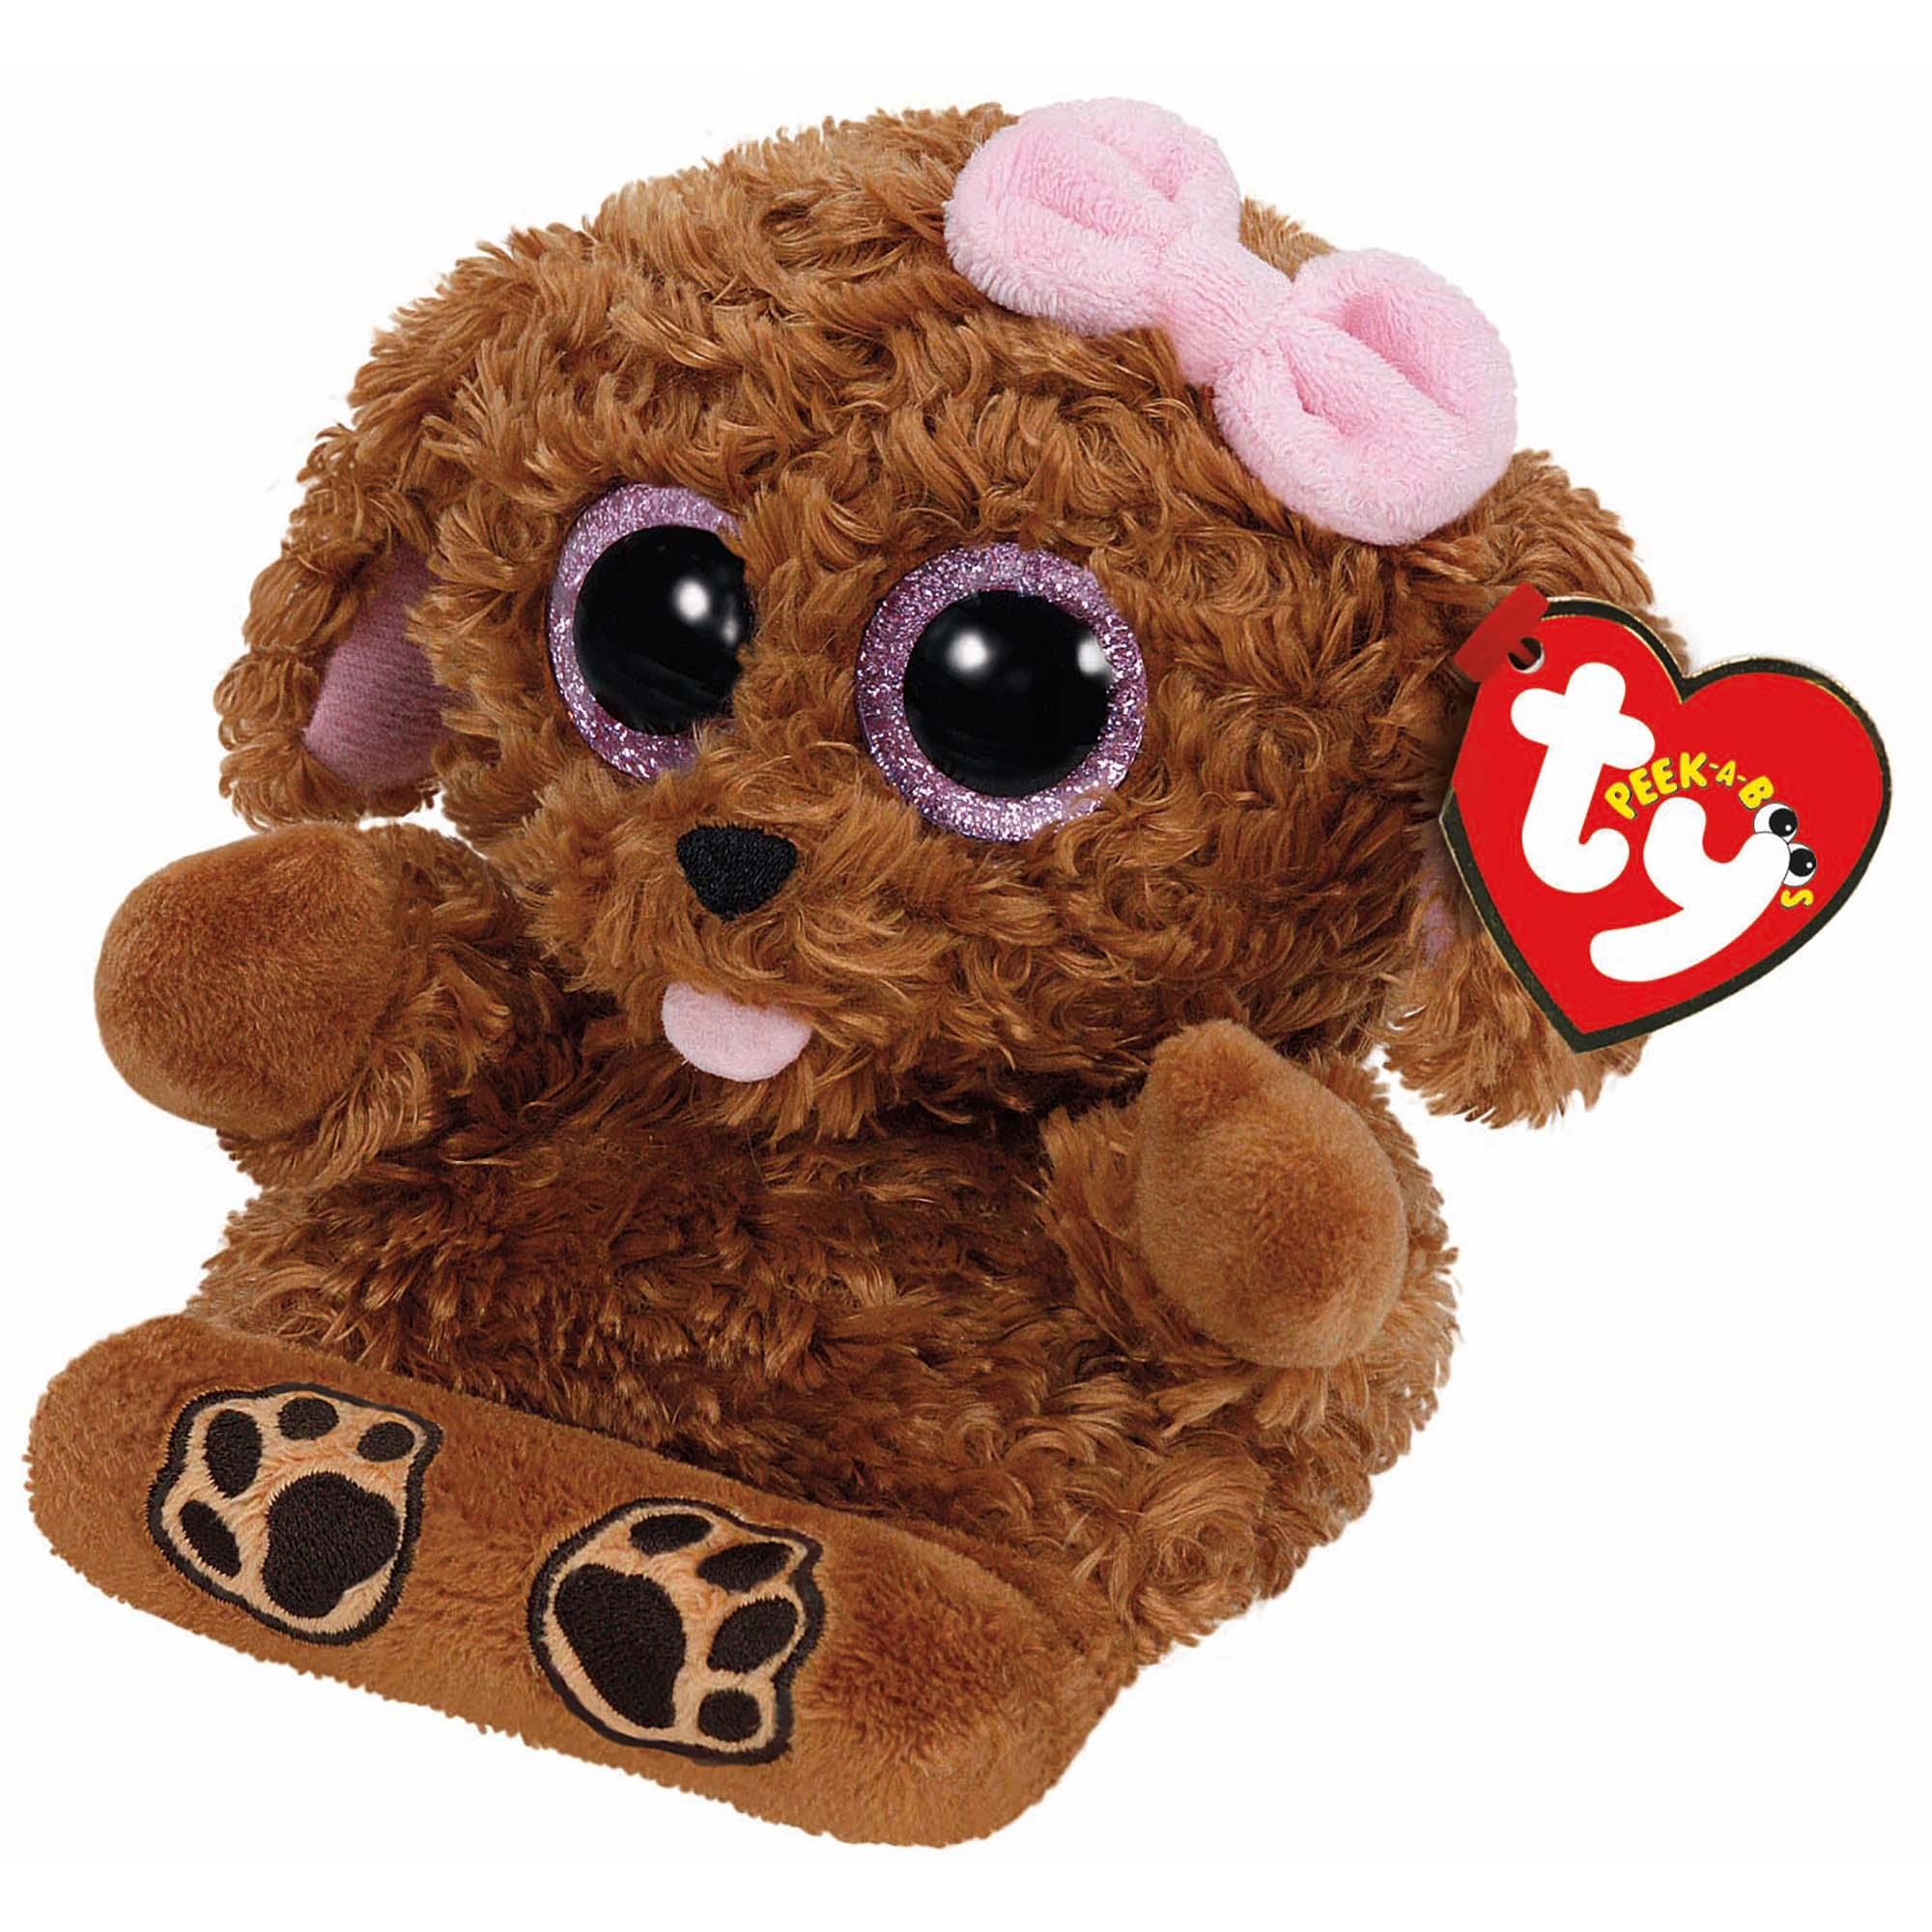 TY Zelda Peek-a-Boo - £5.00 - Hamleys for Toys and Games